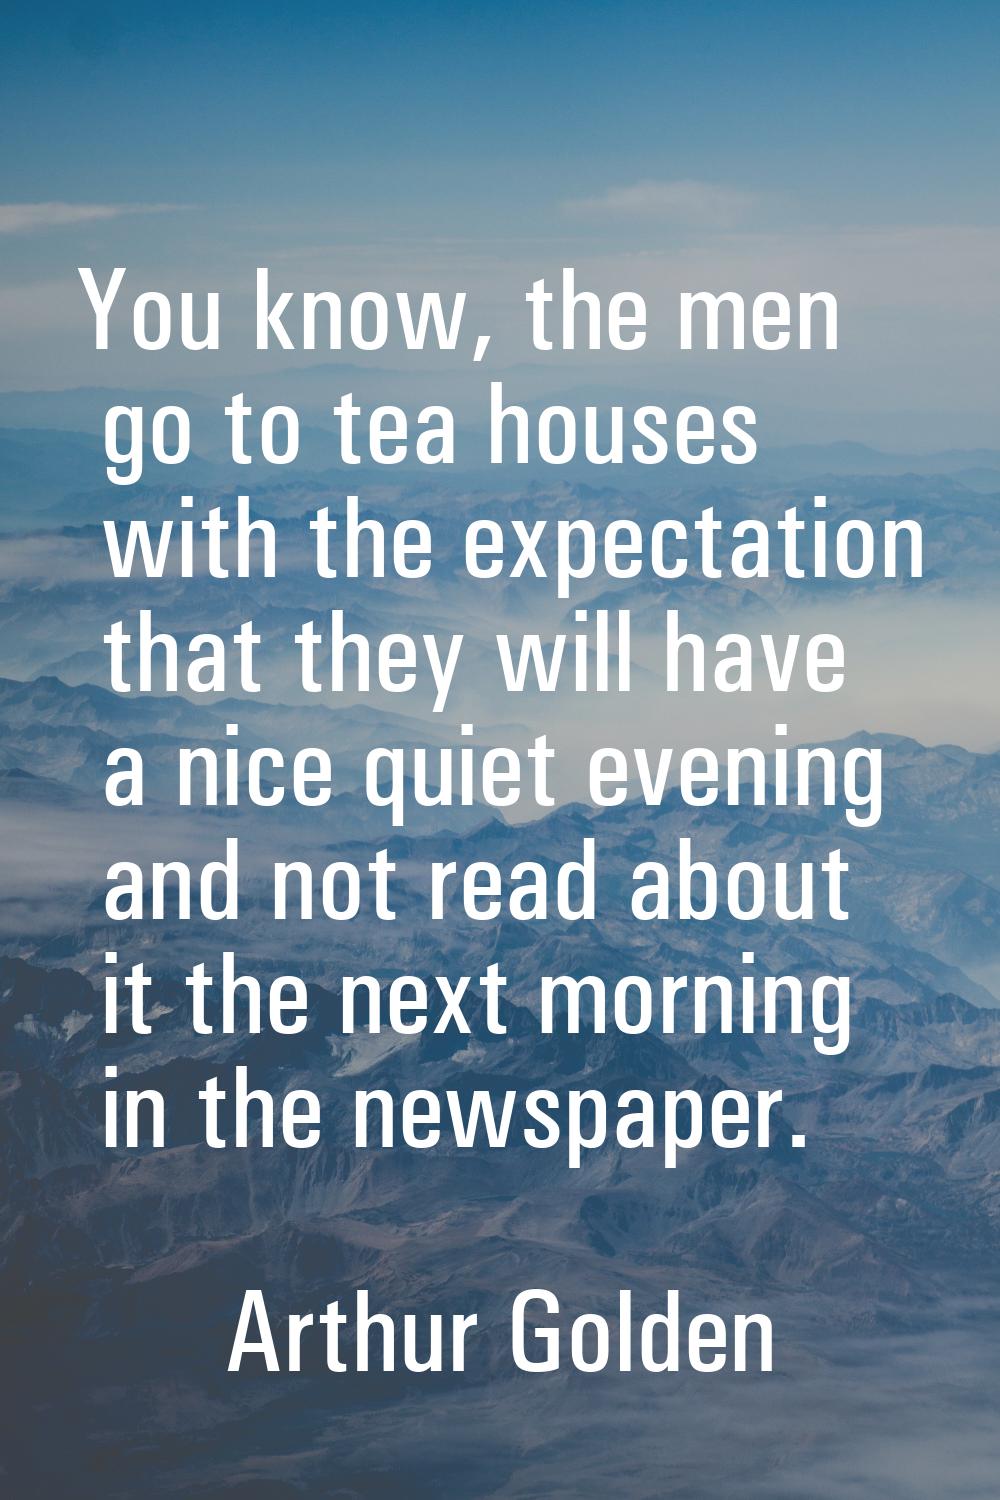 You know, the men go to tea houses with the expectation that they will have a nice quiet evening an